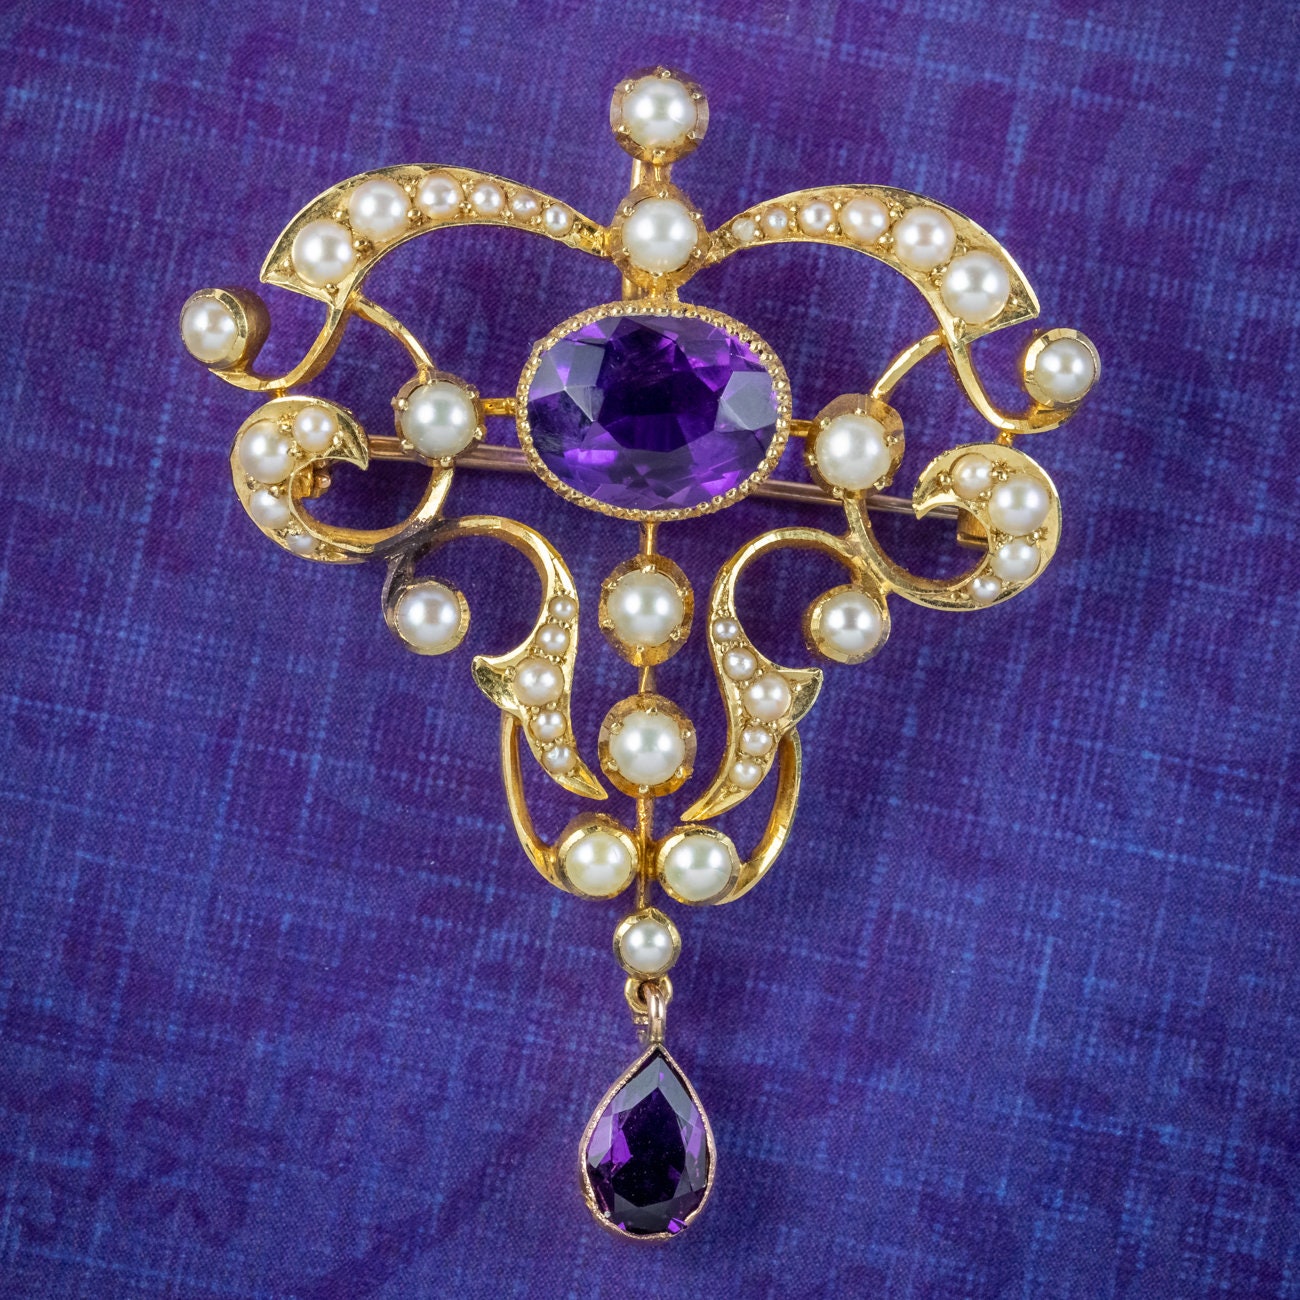 Amethyst and Pearl Vintage Brooch and Convertible Pendant Shield Shaped 14K Yellow Gold Vintage Filigree